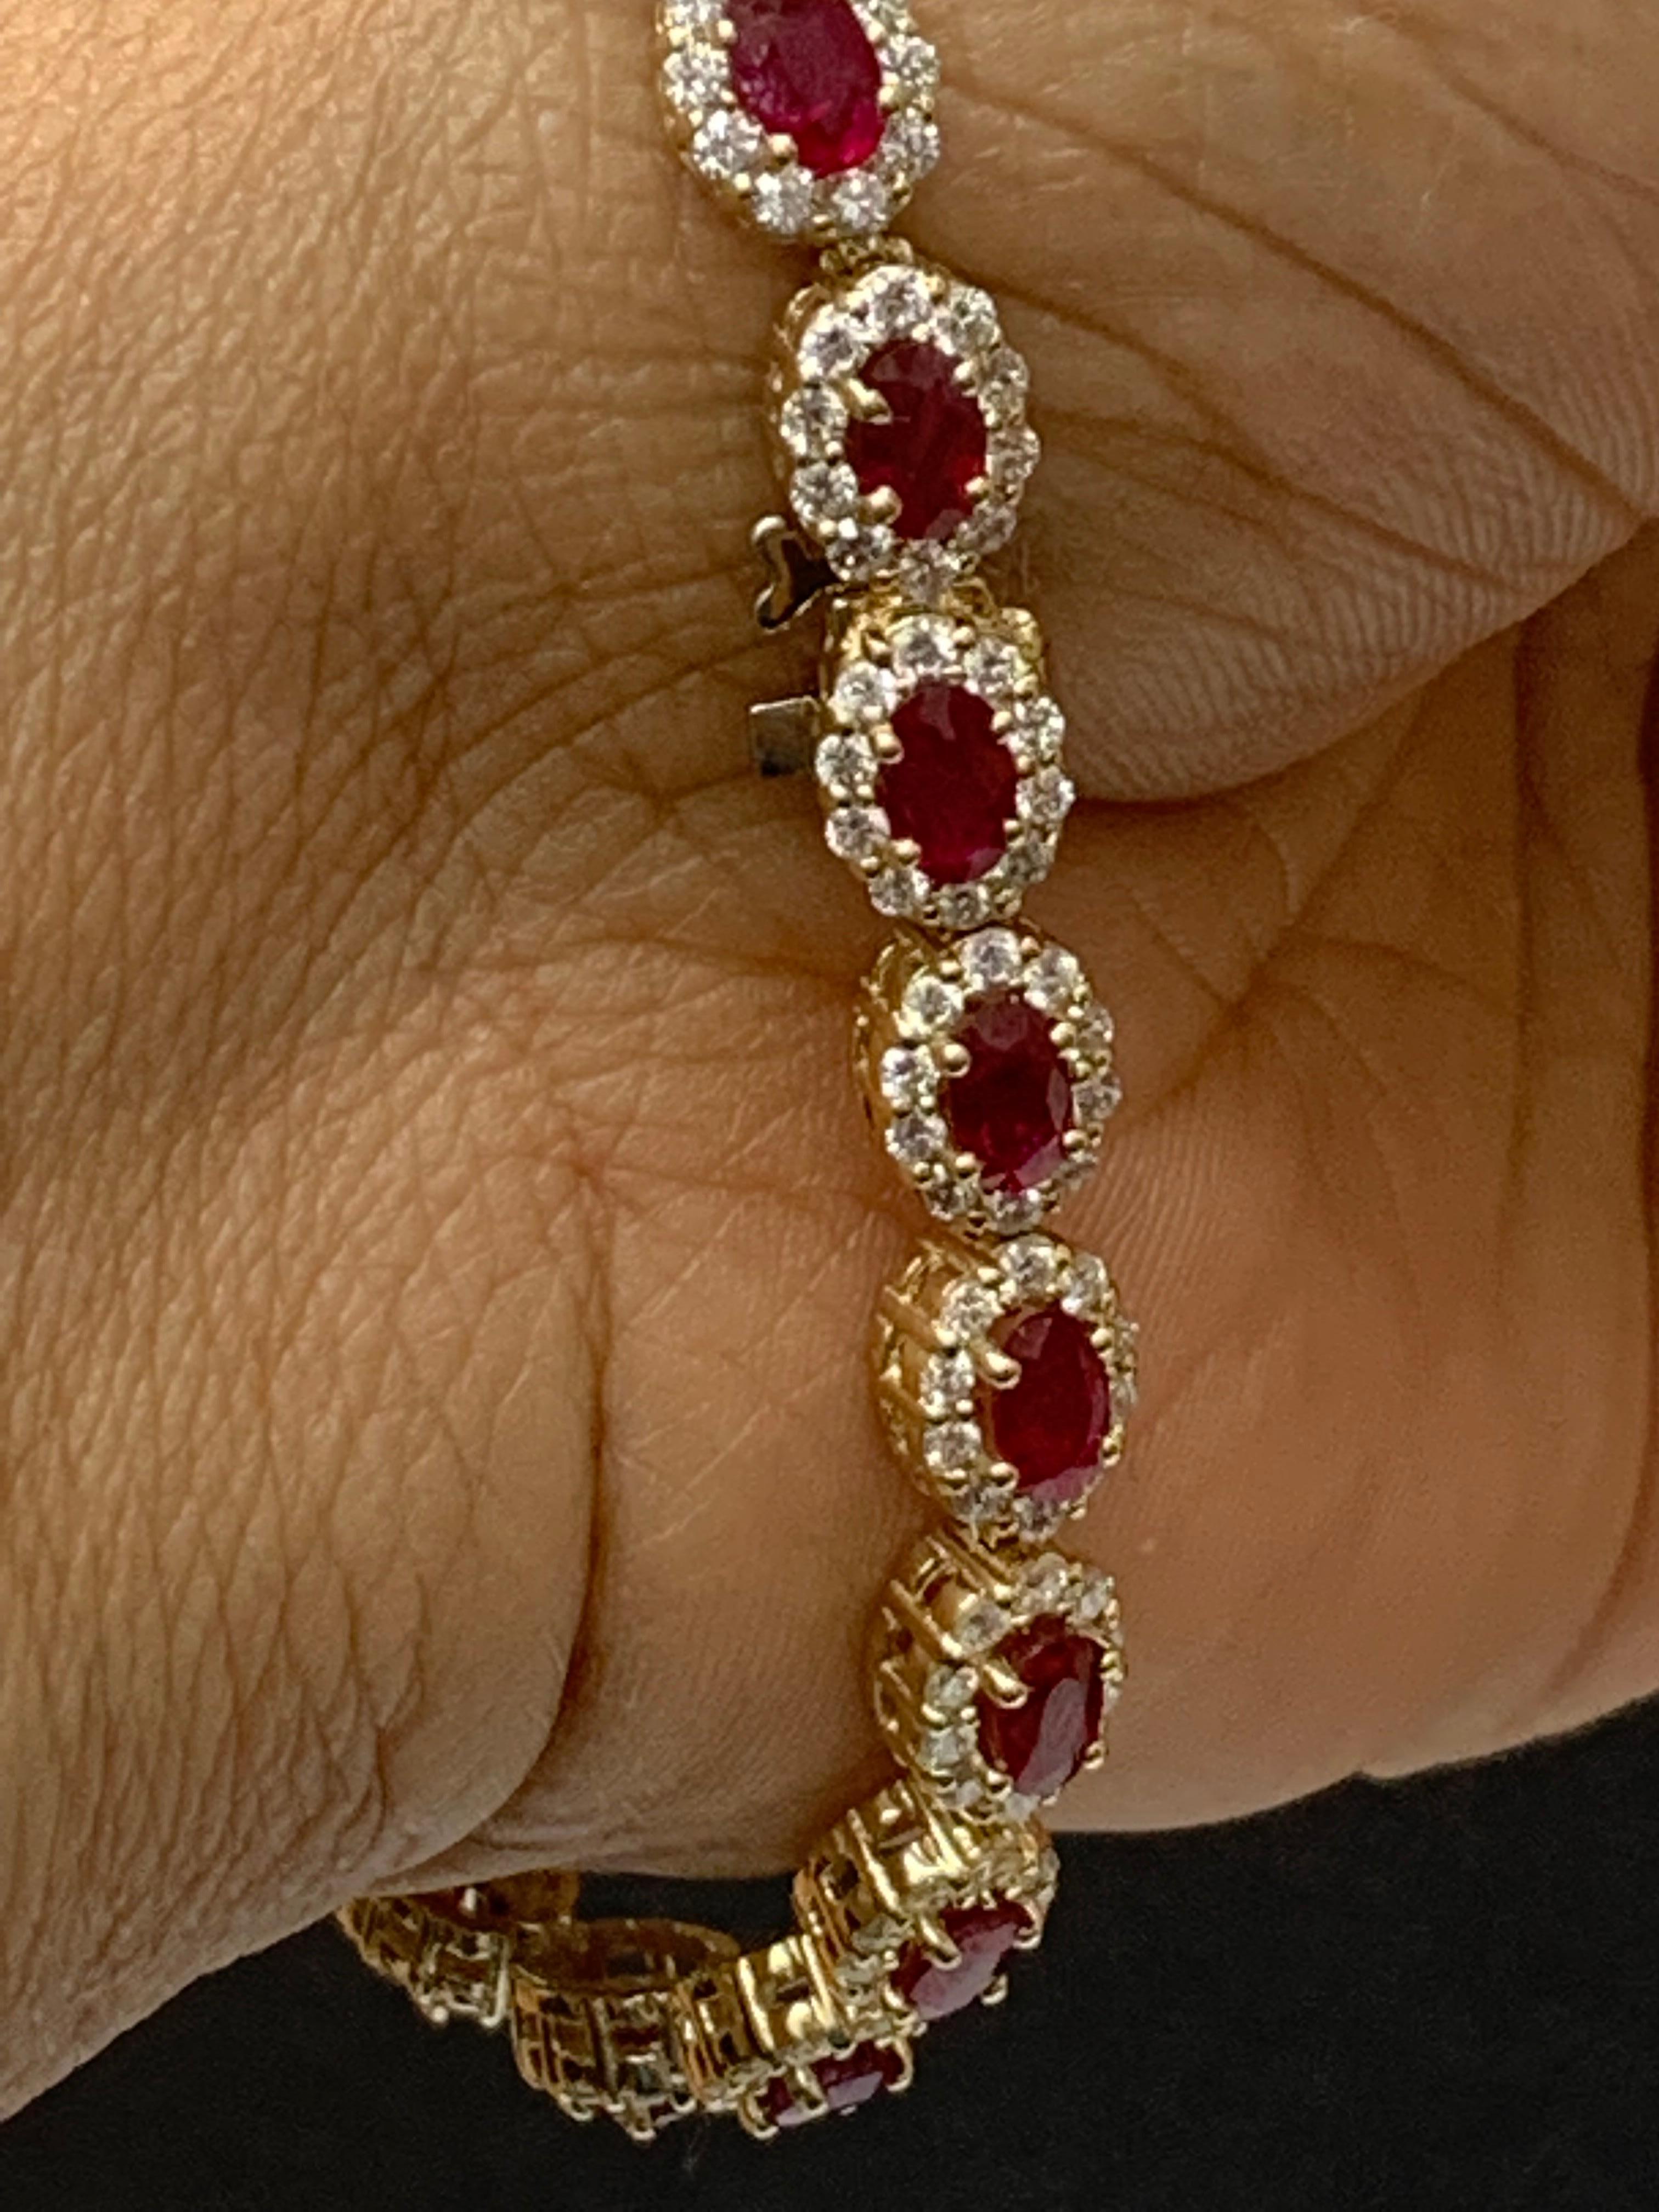 6.43 Carat Oval Cut Ruby and Diamond Halo Bracelet in 14K Yellow Gold For Sale 4